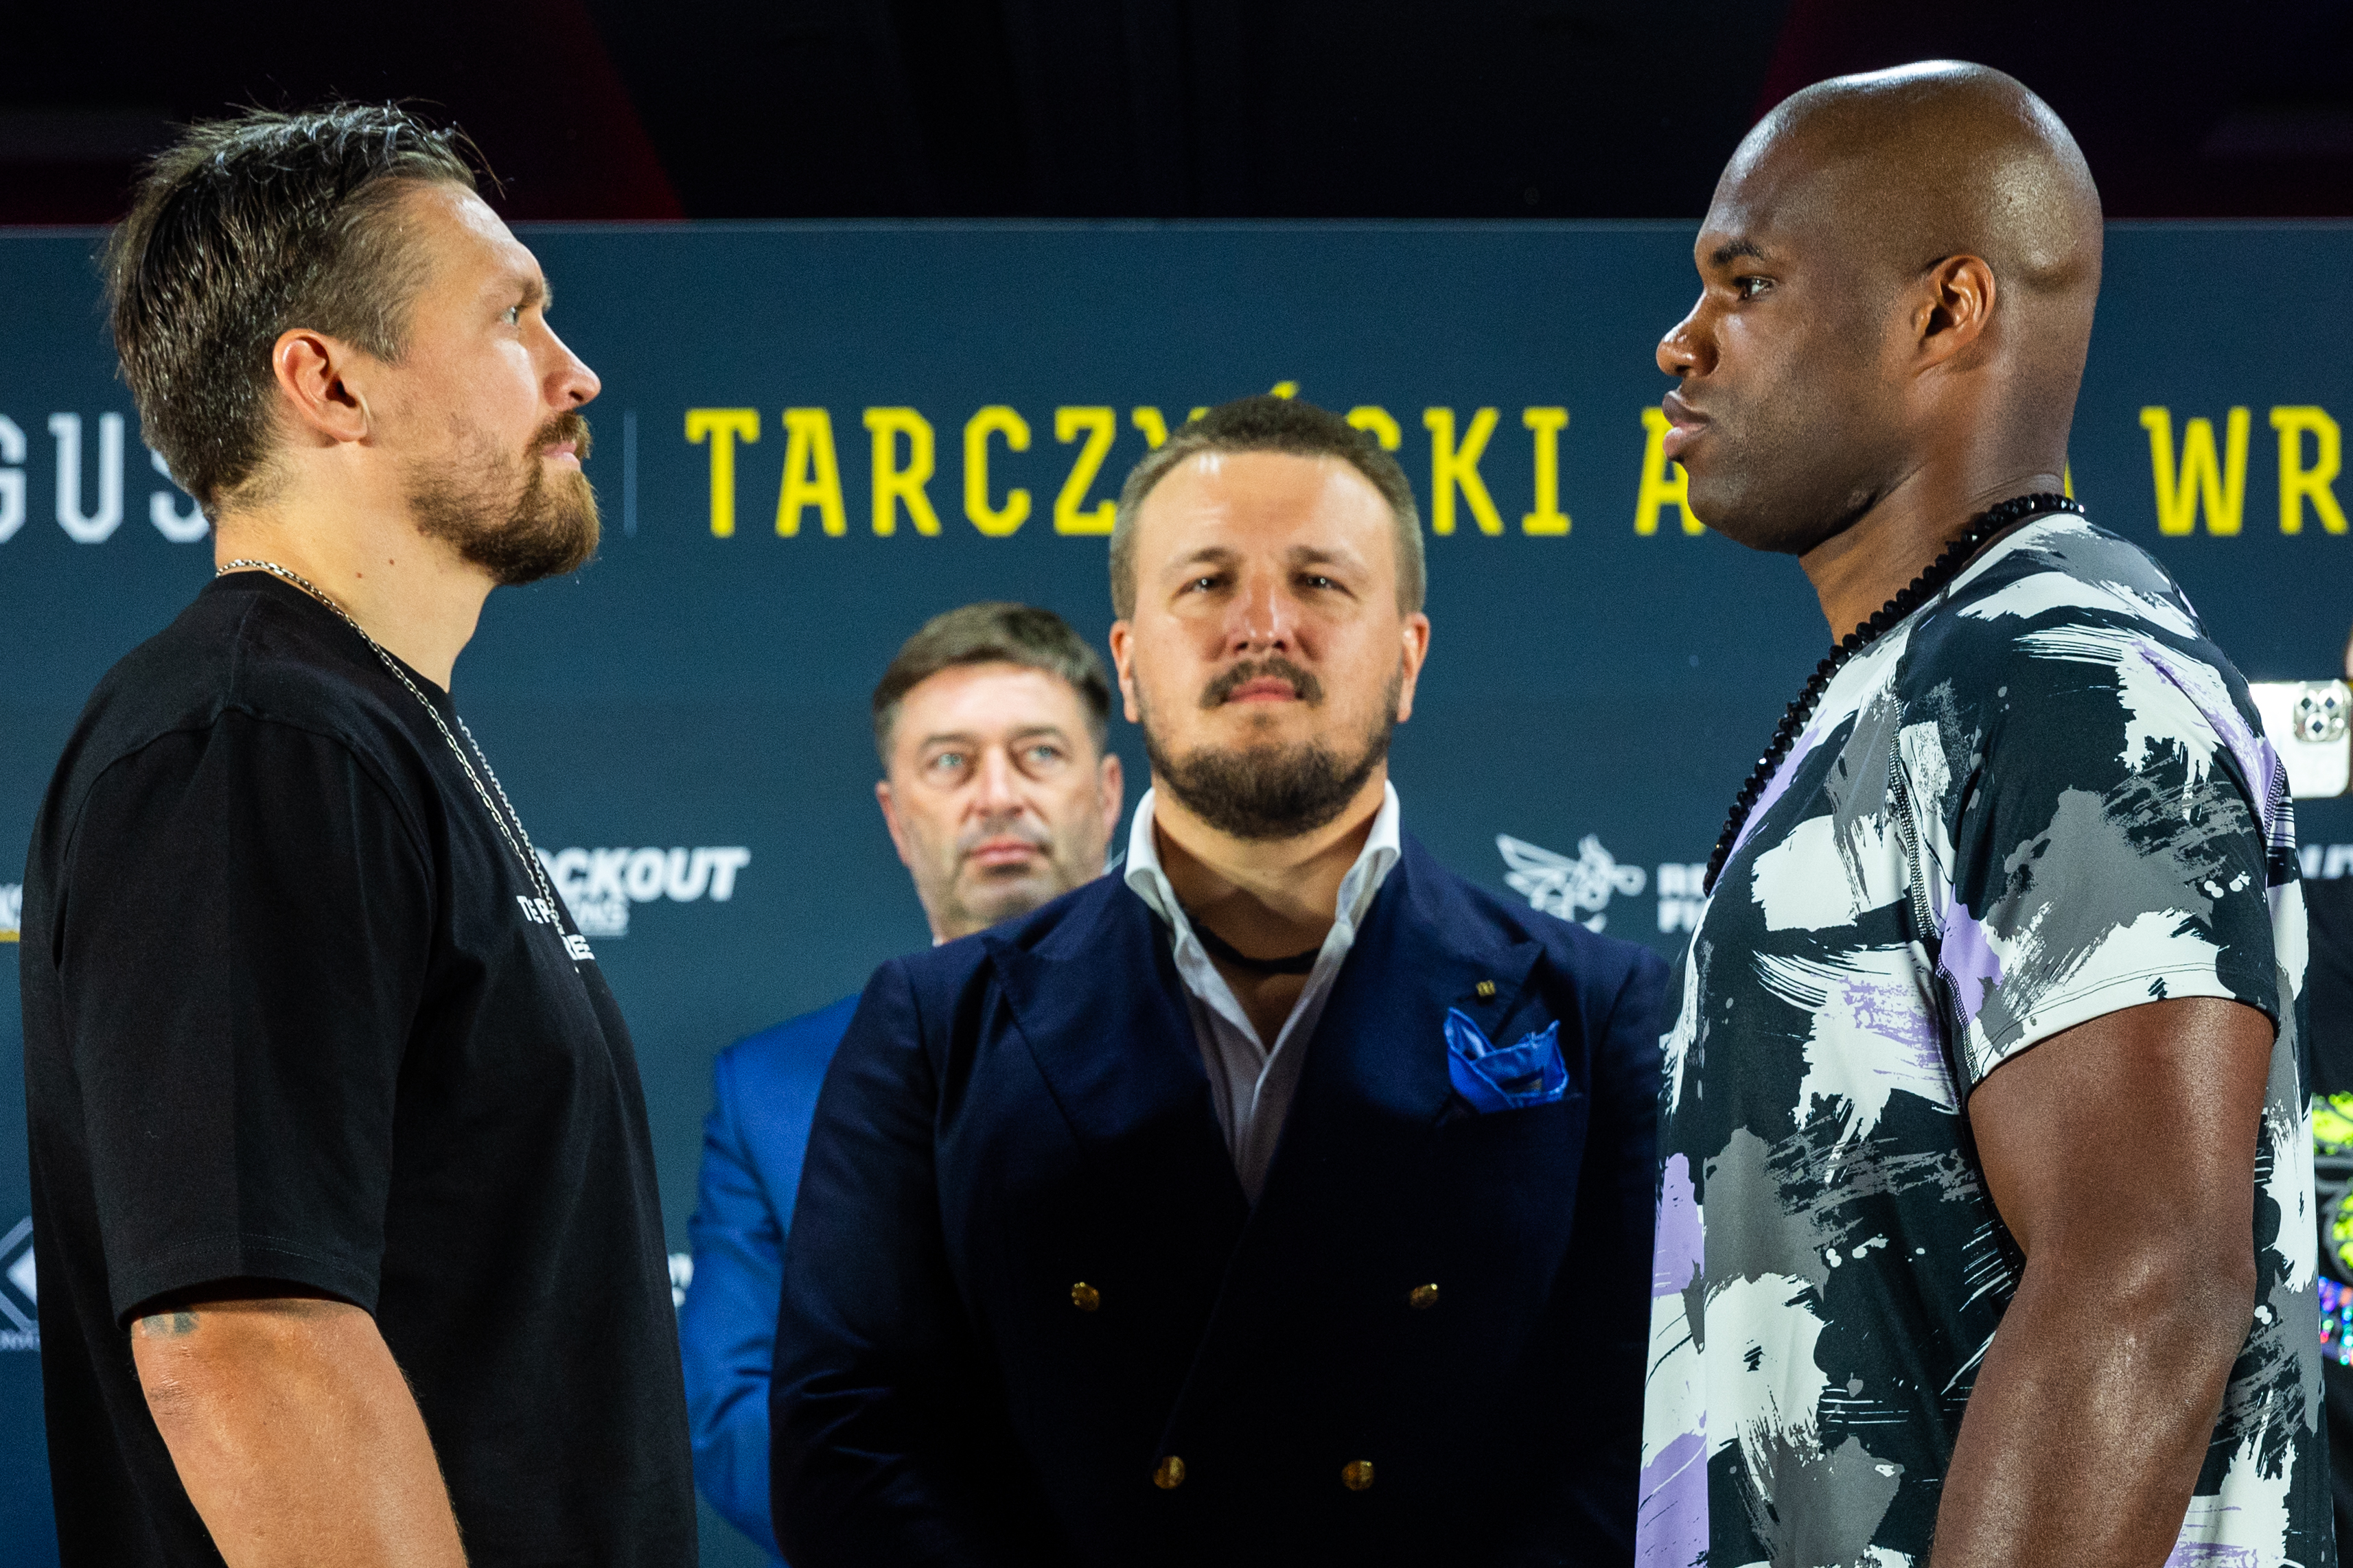 Press Conference Before The Usyk - Dubois Boxing Fight